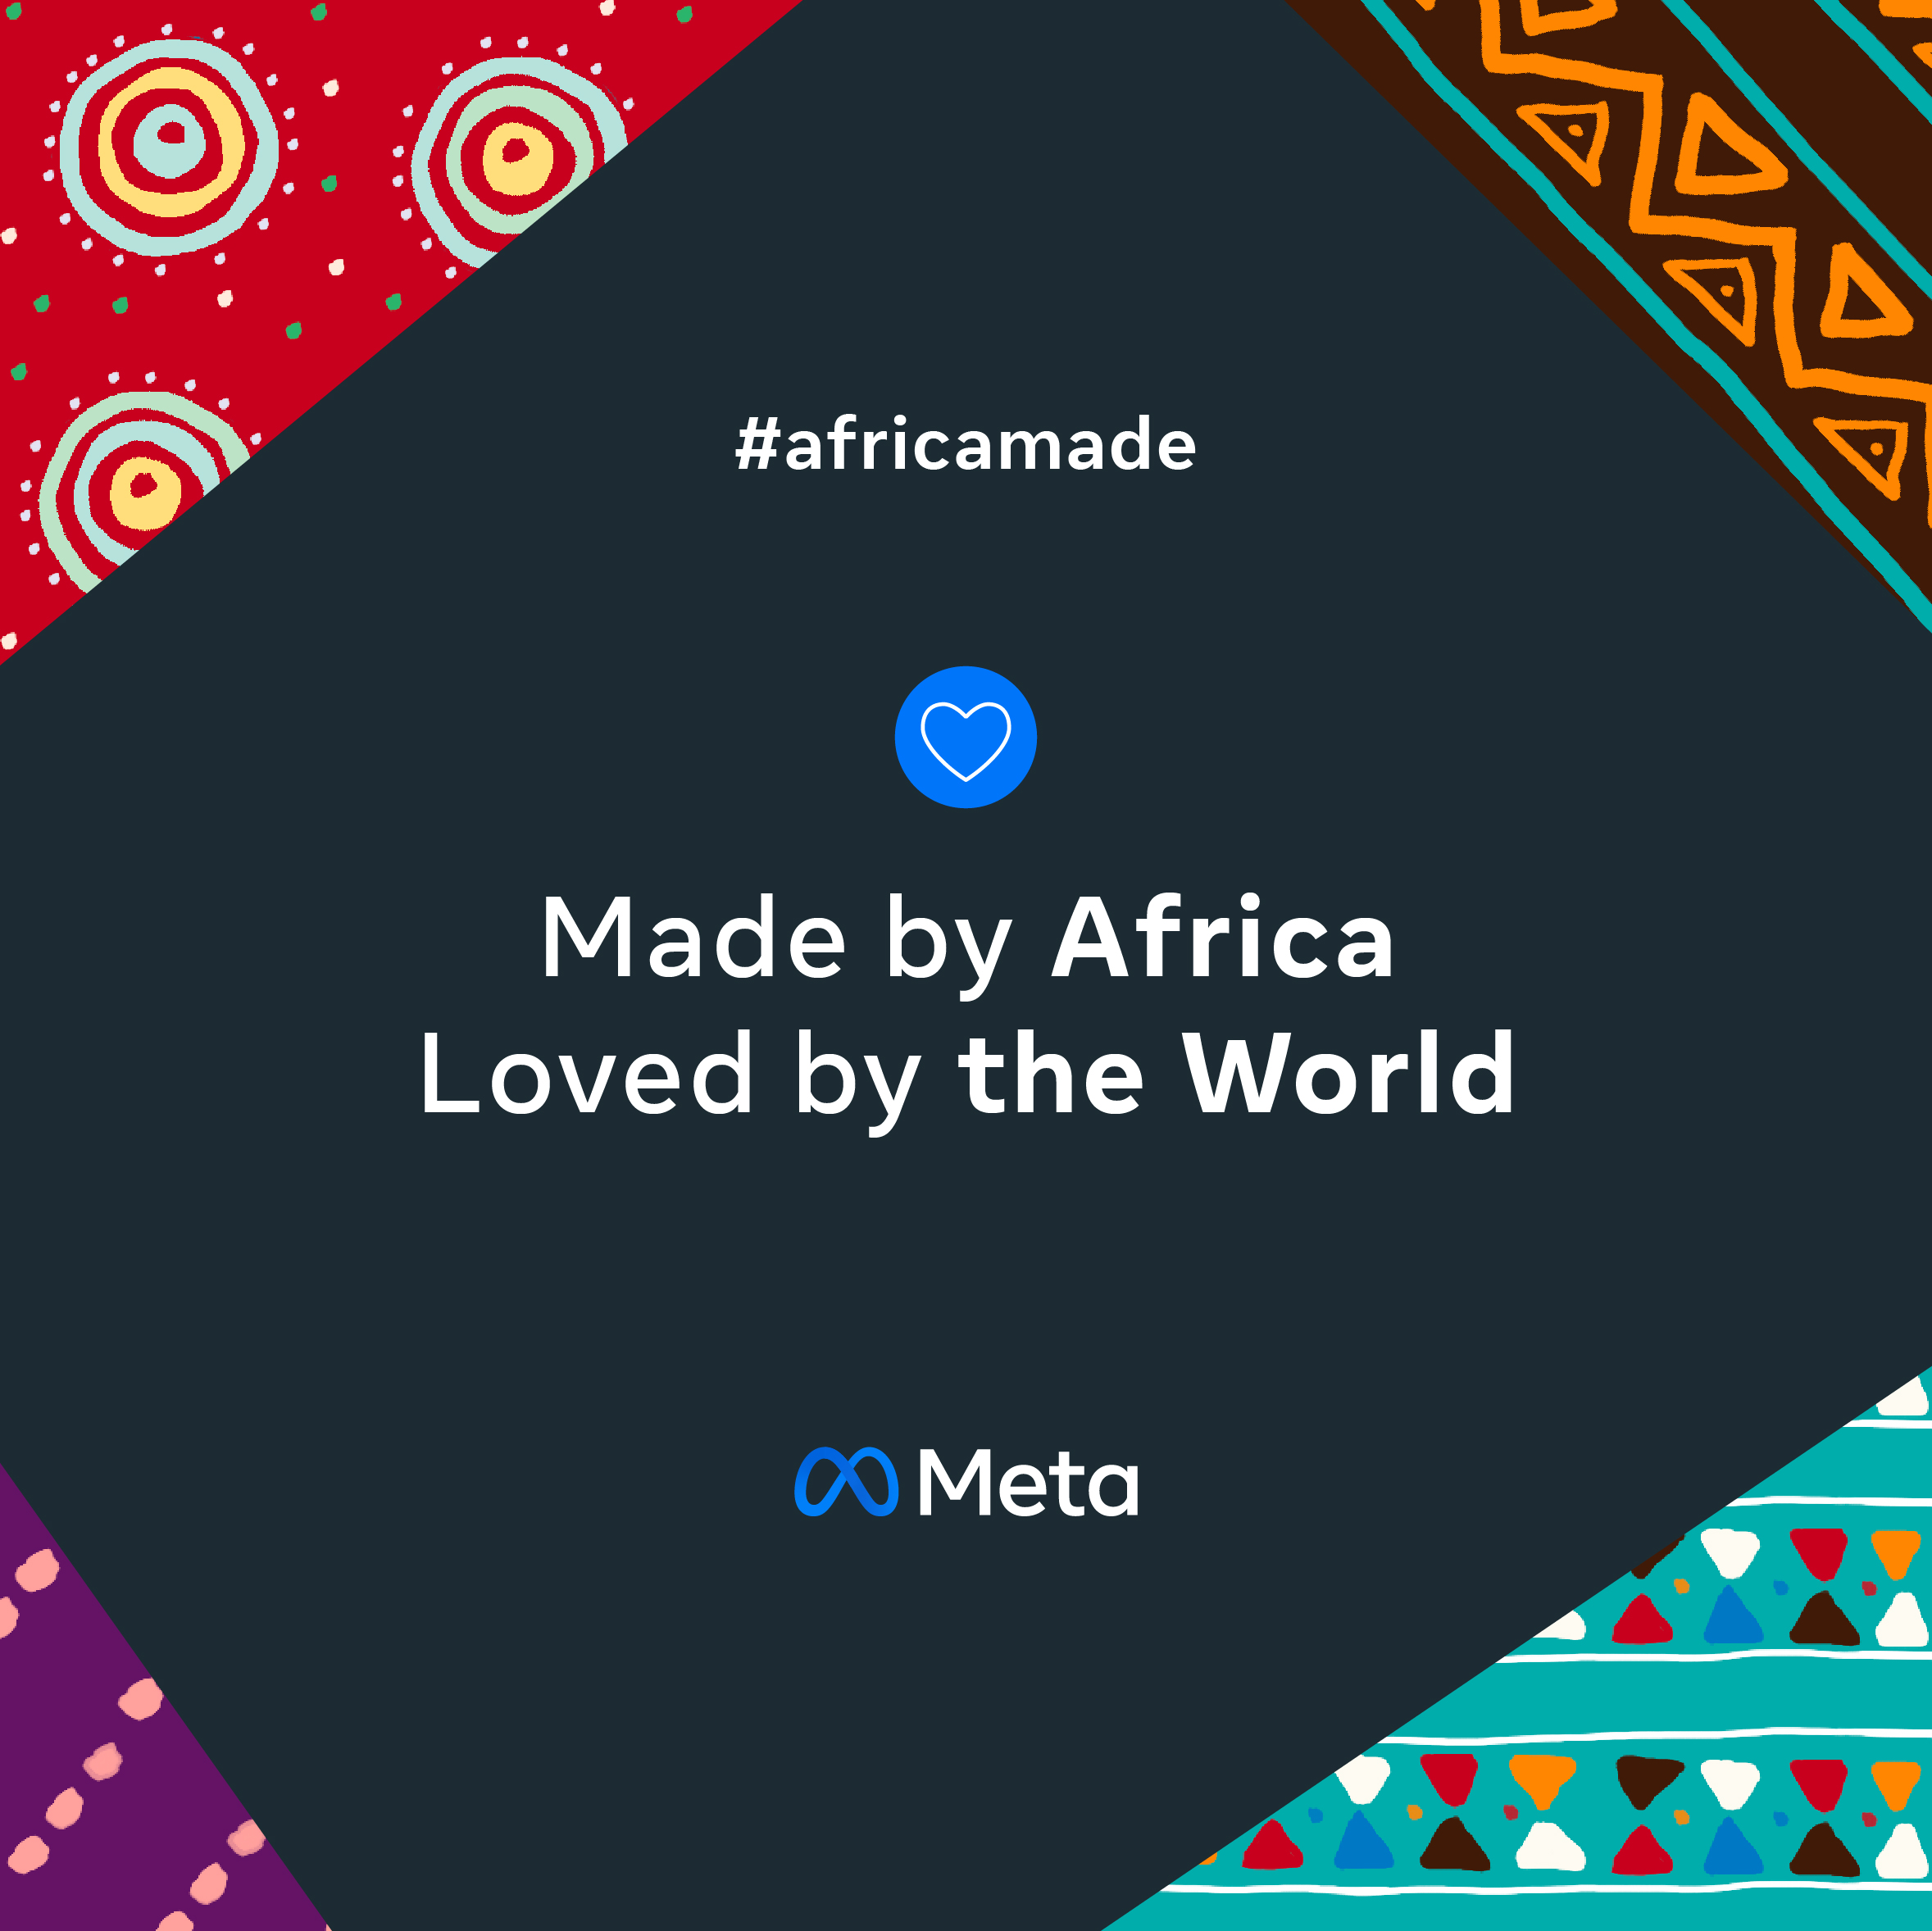 ‘Made by Africa, Loved by the World’: Meta launches its Africa Day campaign spotlighting and celebrating Africans making a global impact